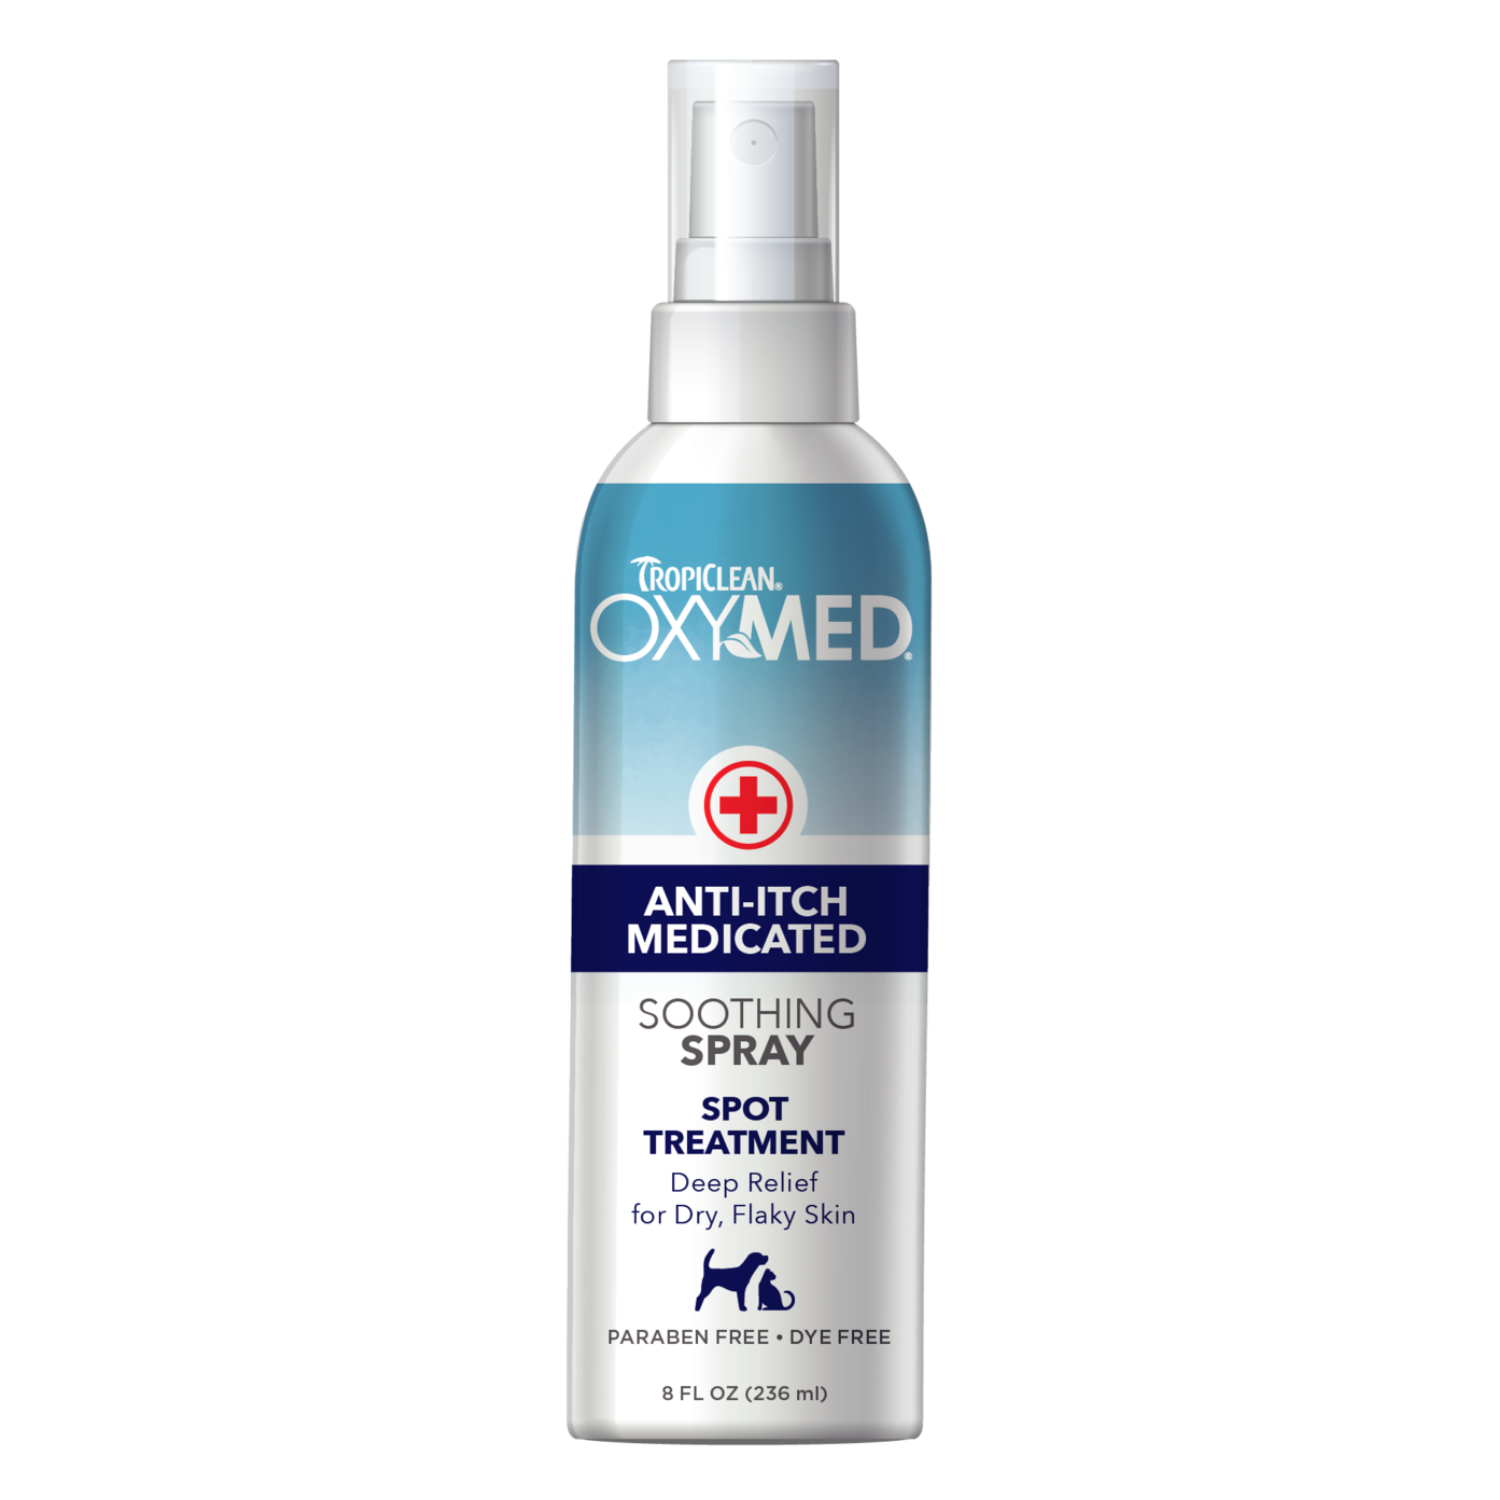 Tropiclean Oxymed Anti-Itch Medicated Spray - 236ml